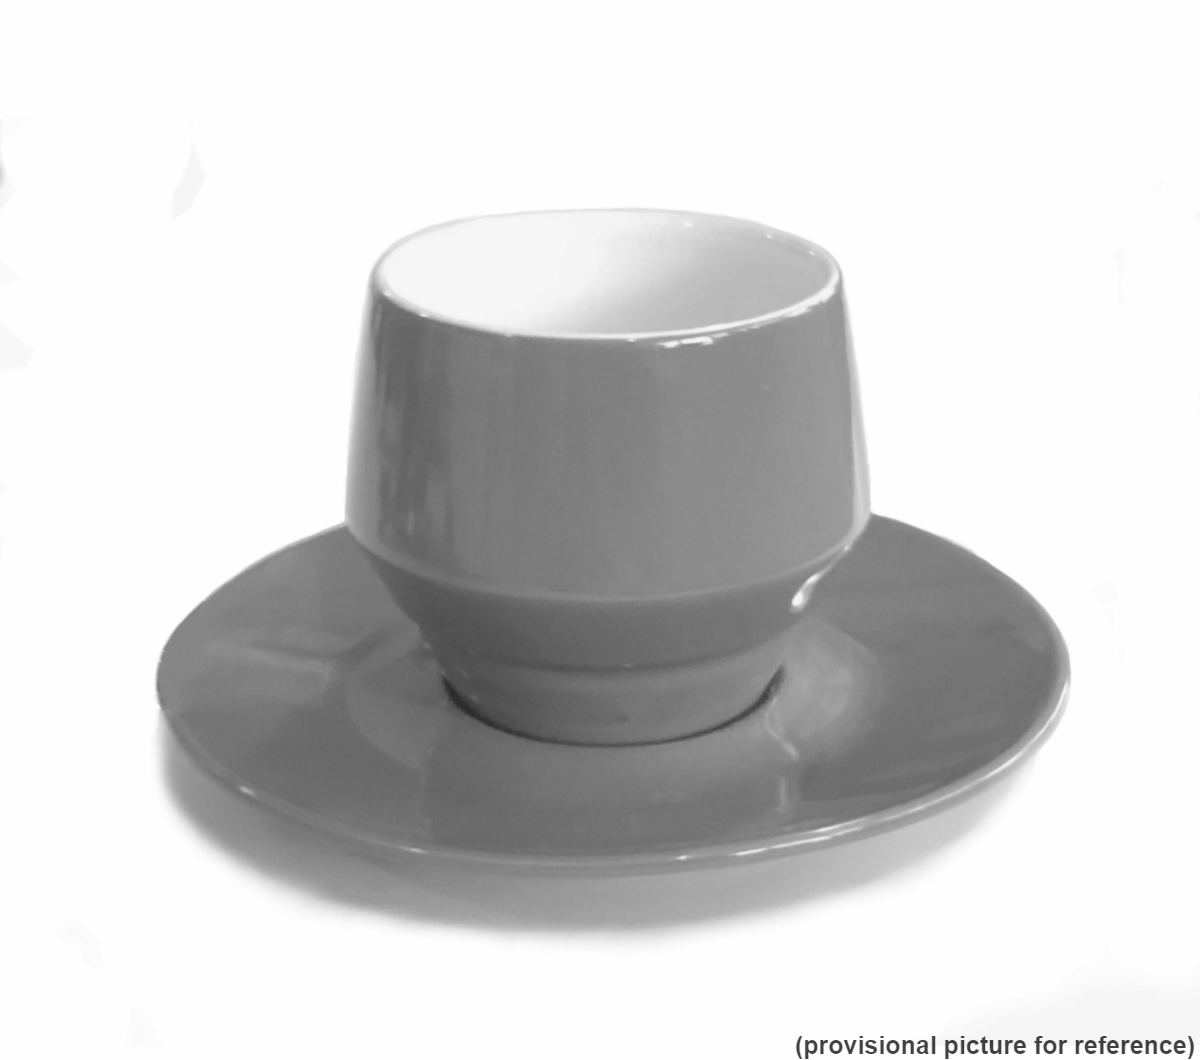 "MANIKO" Double-Walled GREY - 115ml Cappuccino Cups